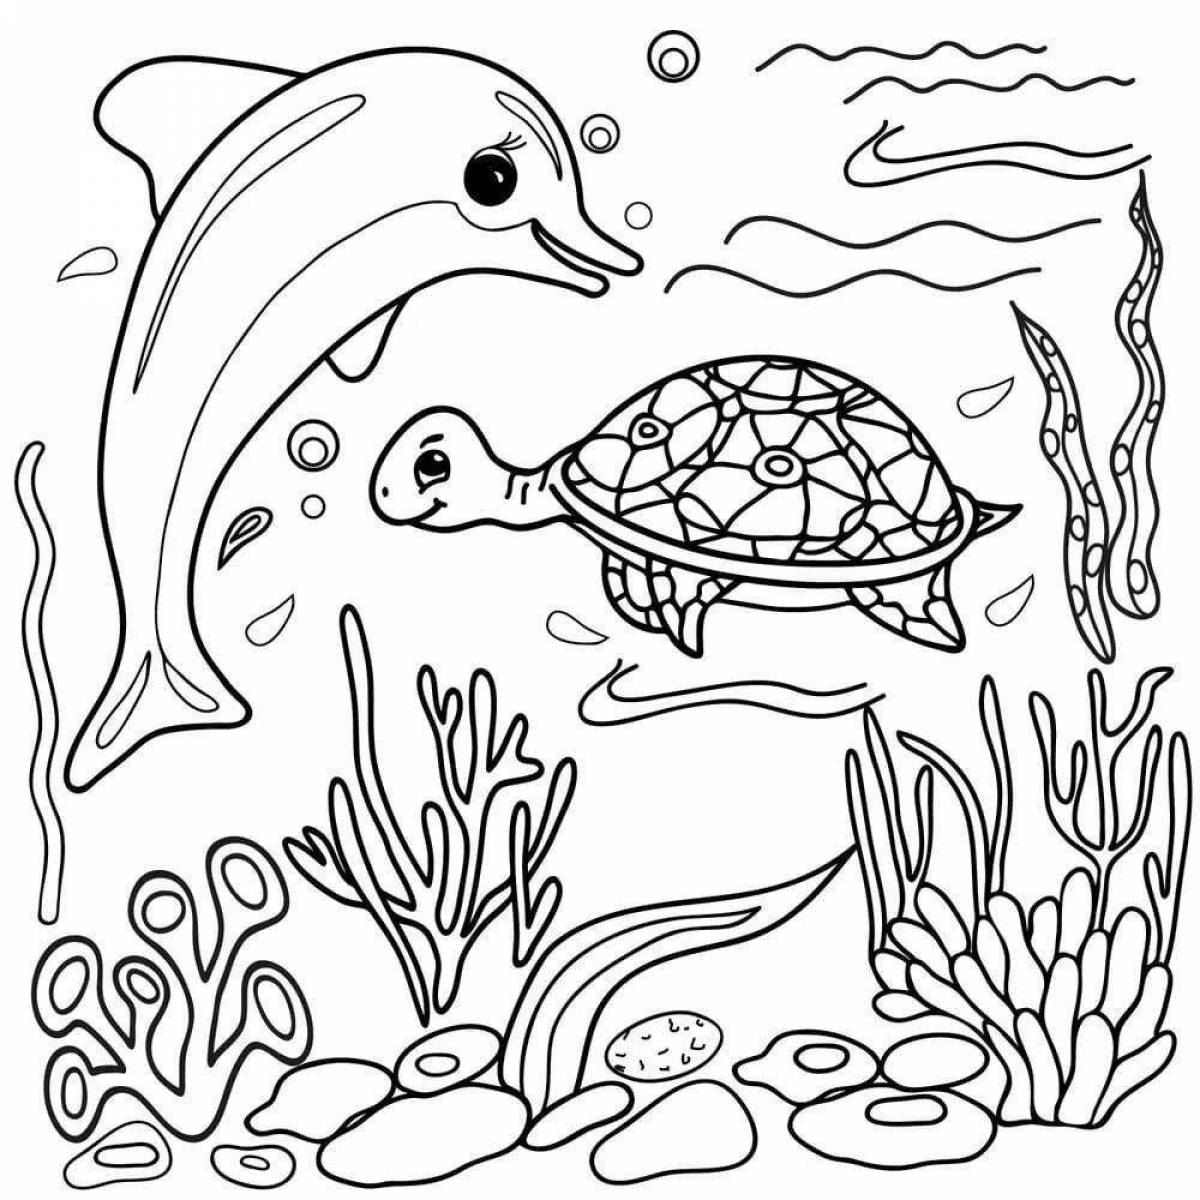 Charming coloring pages inhabitants of the seas and oceans for children